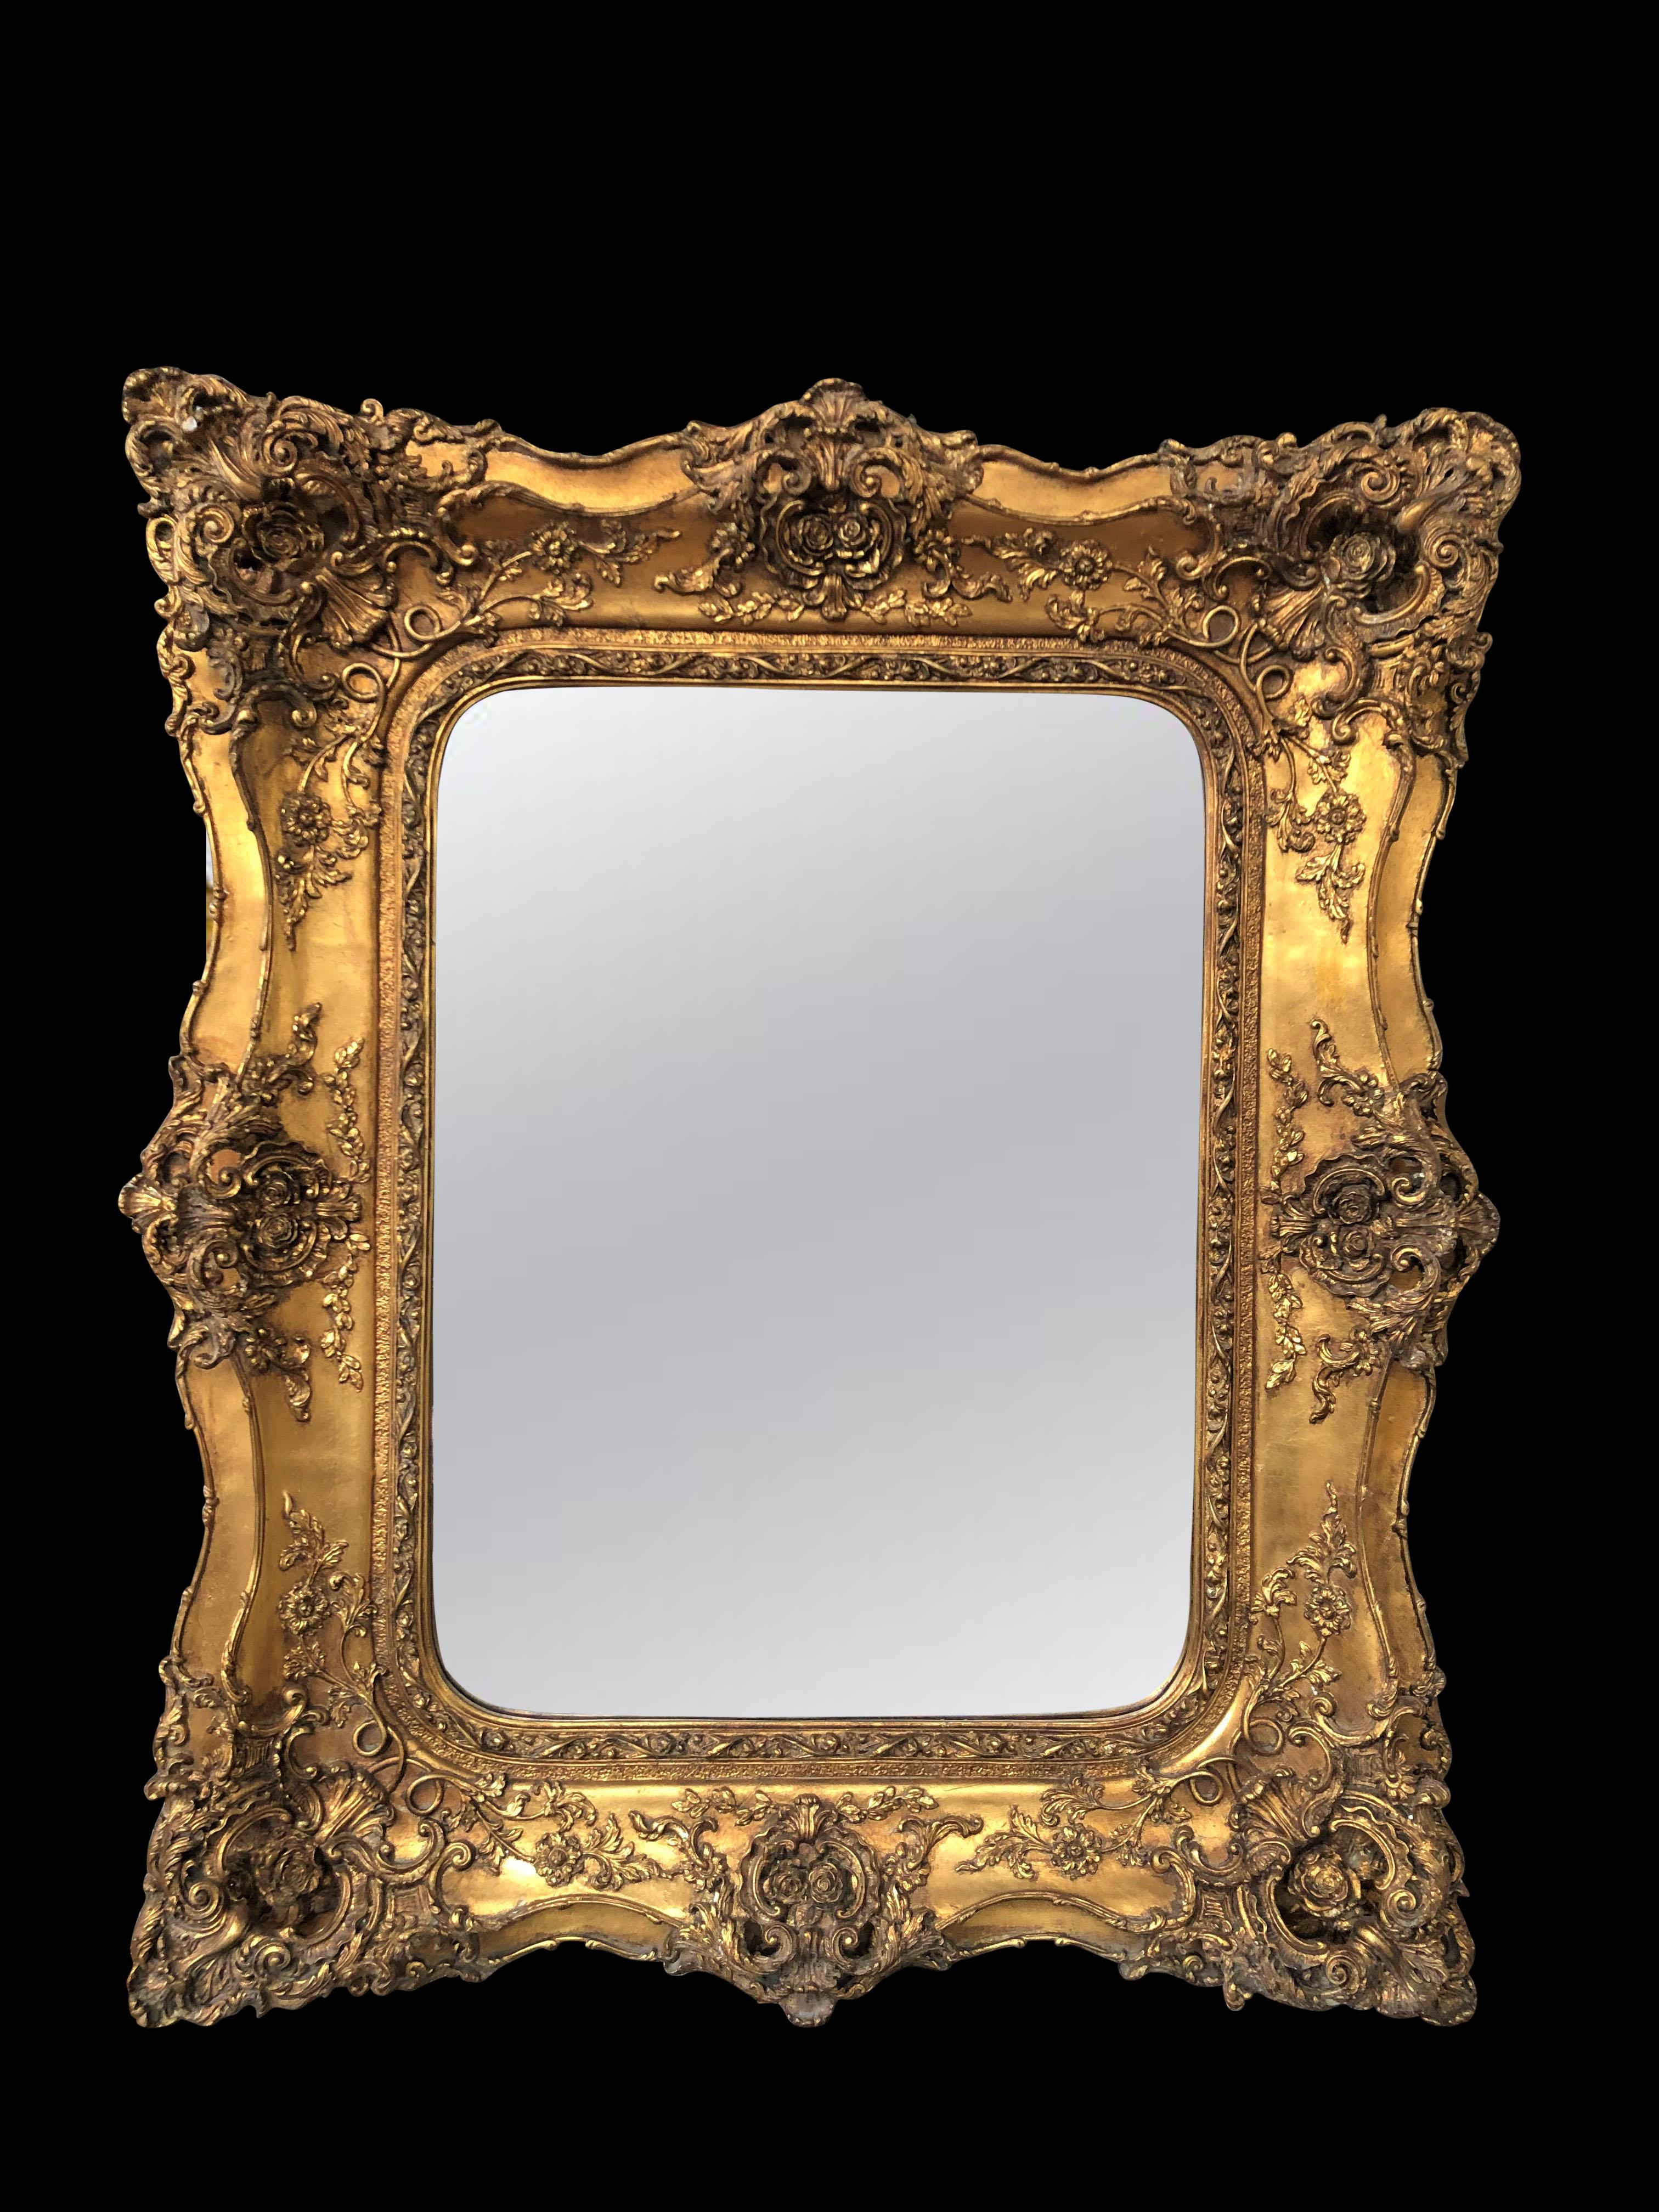 A stunning Victorian style gilt mirror with intricate frame and floral carving, 20th century. Can be hung portrait or landscape. Frame really makes this stand out, very florid details. Glass is clear and blemish free ready to add space and light to